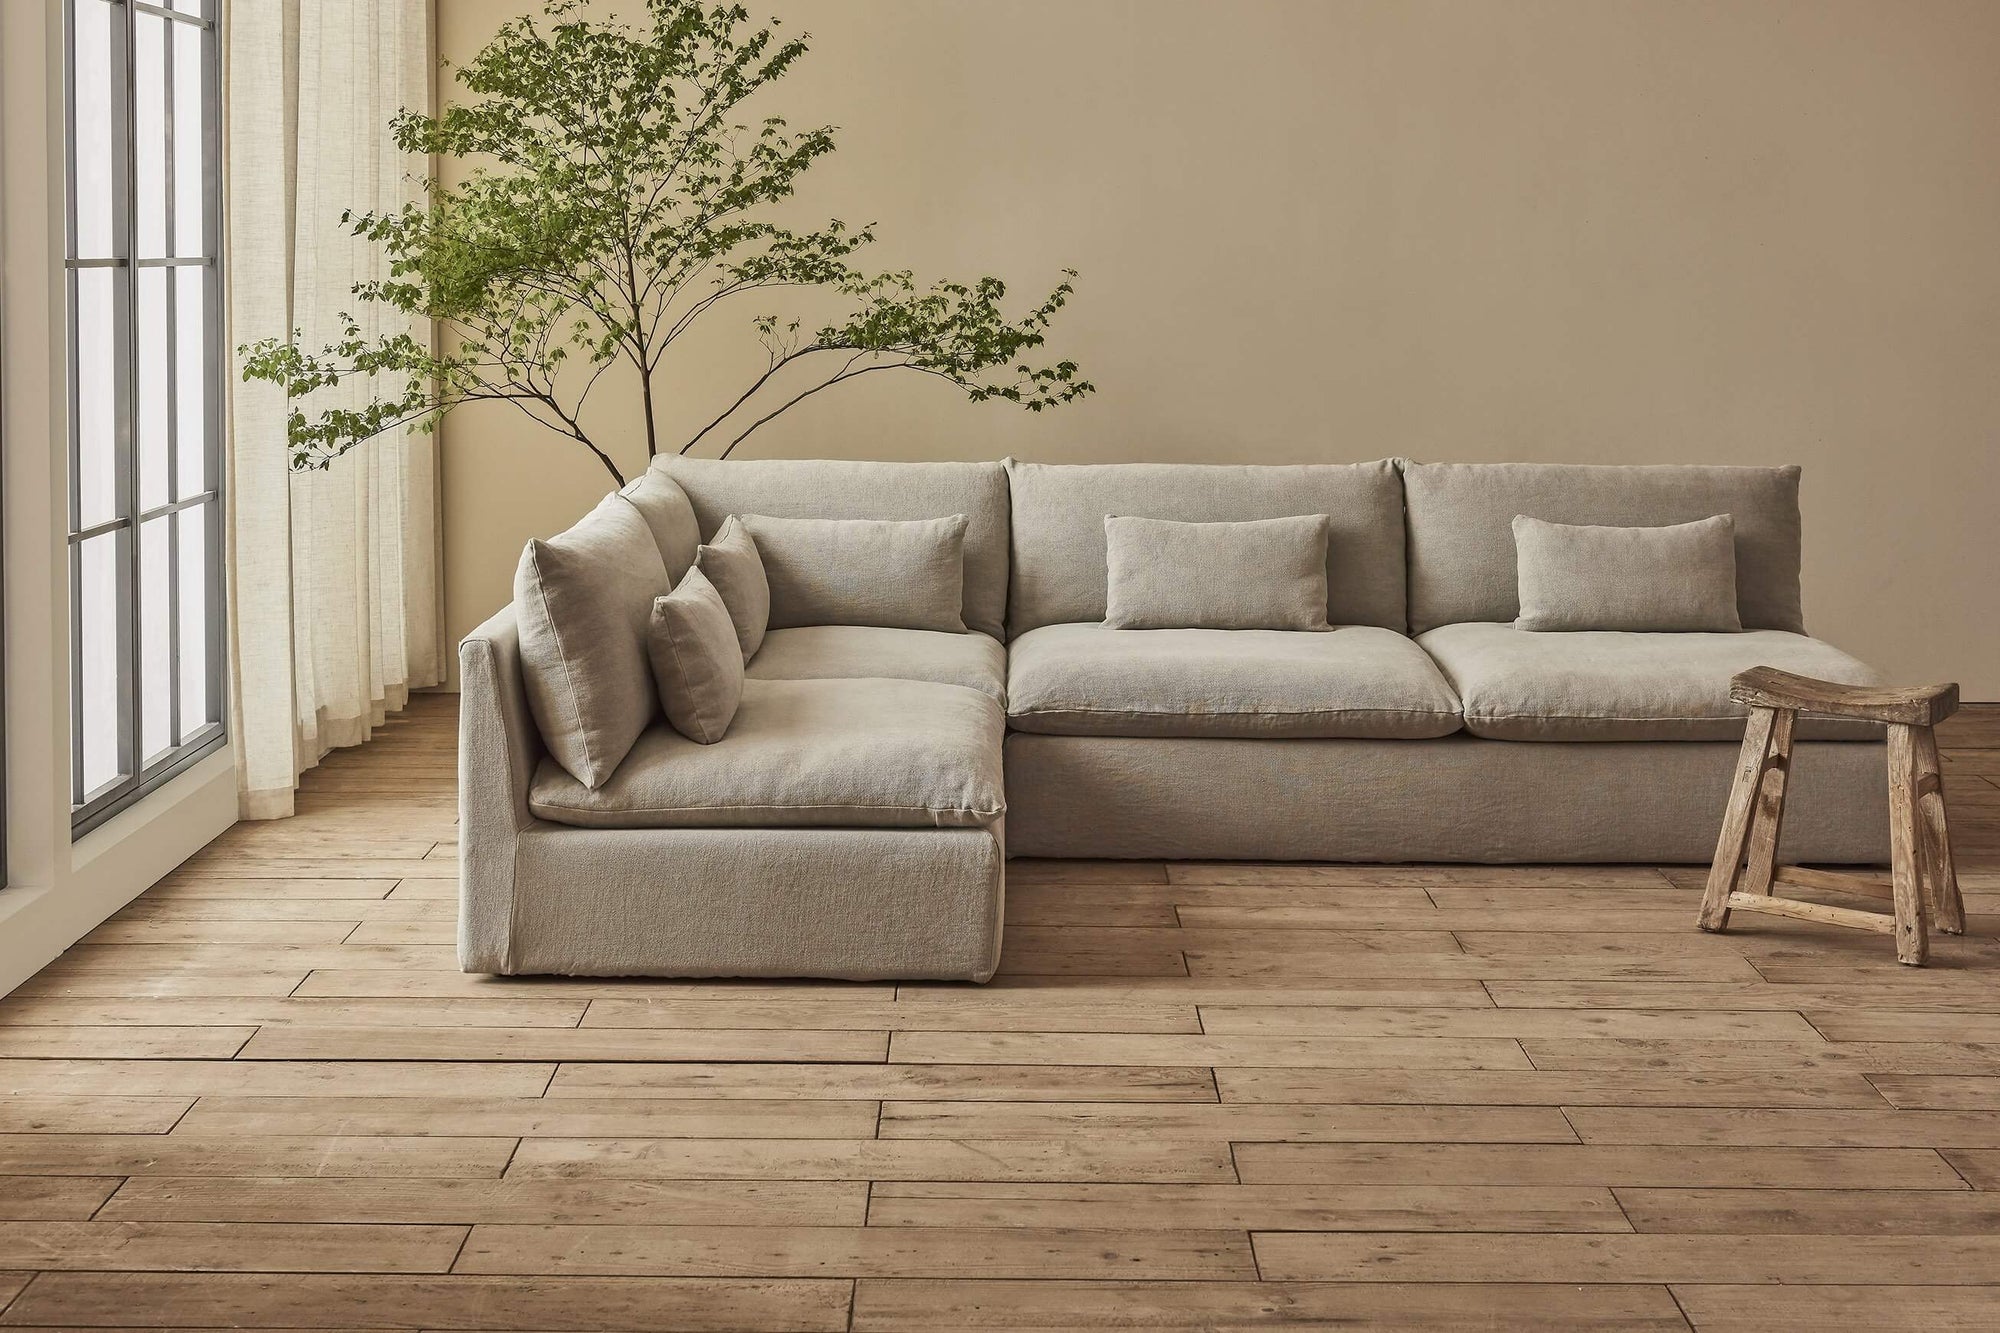 Aria Long L-Shape Sectional Sofa in Jasmine Rice, a light warm greige Medium Weight Linen, placed in a sunlit room with a wooden stool and a large plant